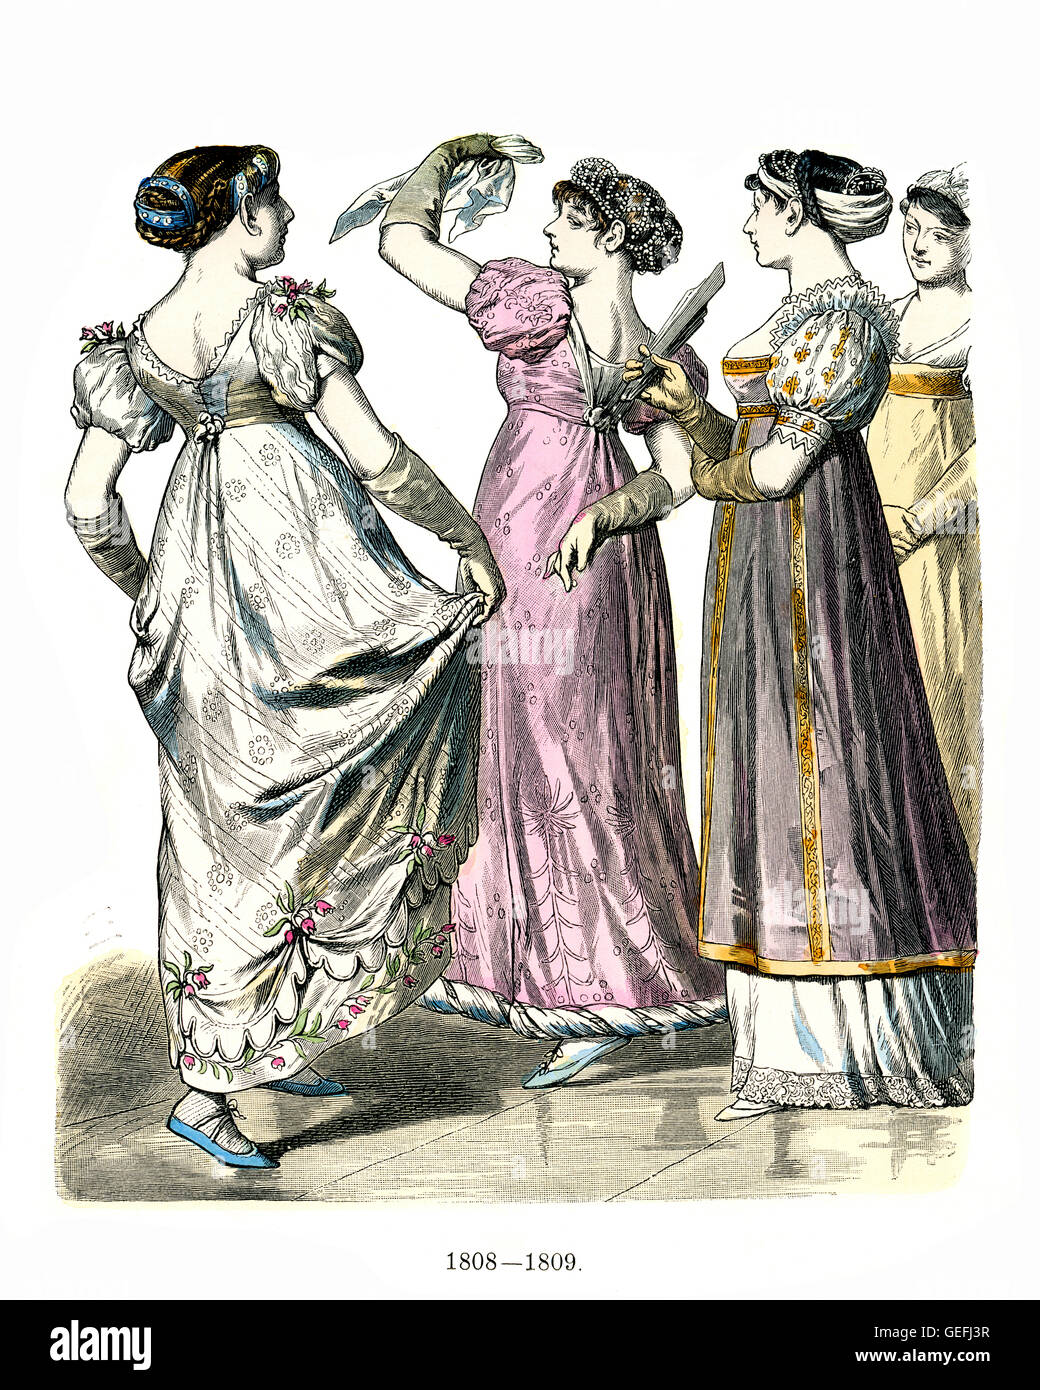 Women's fashions at the start of the 19th century Stock Photo